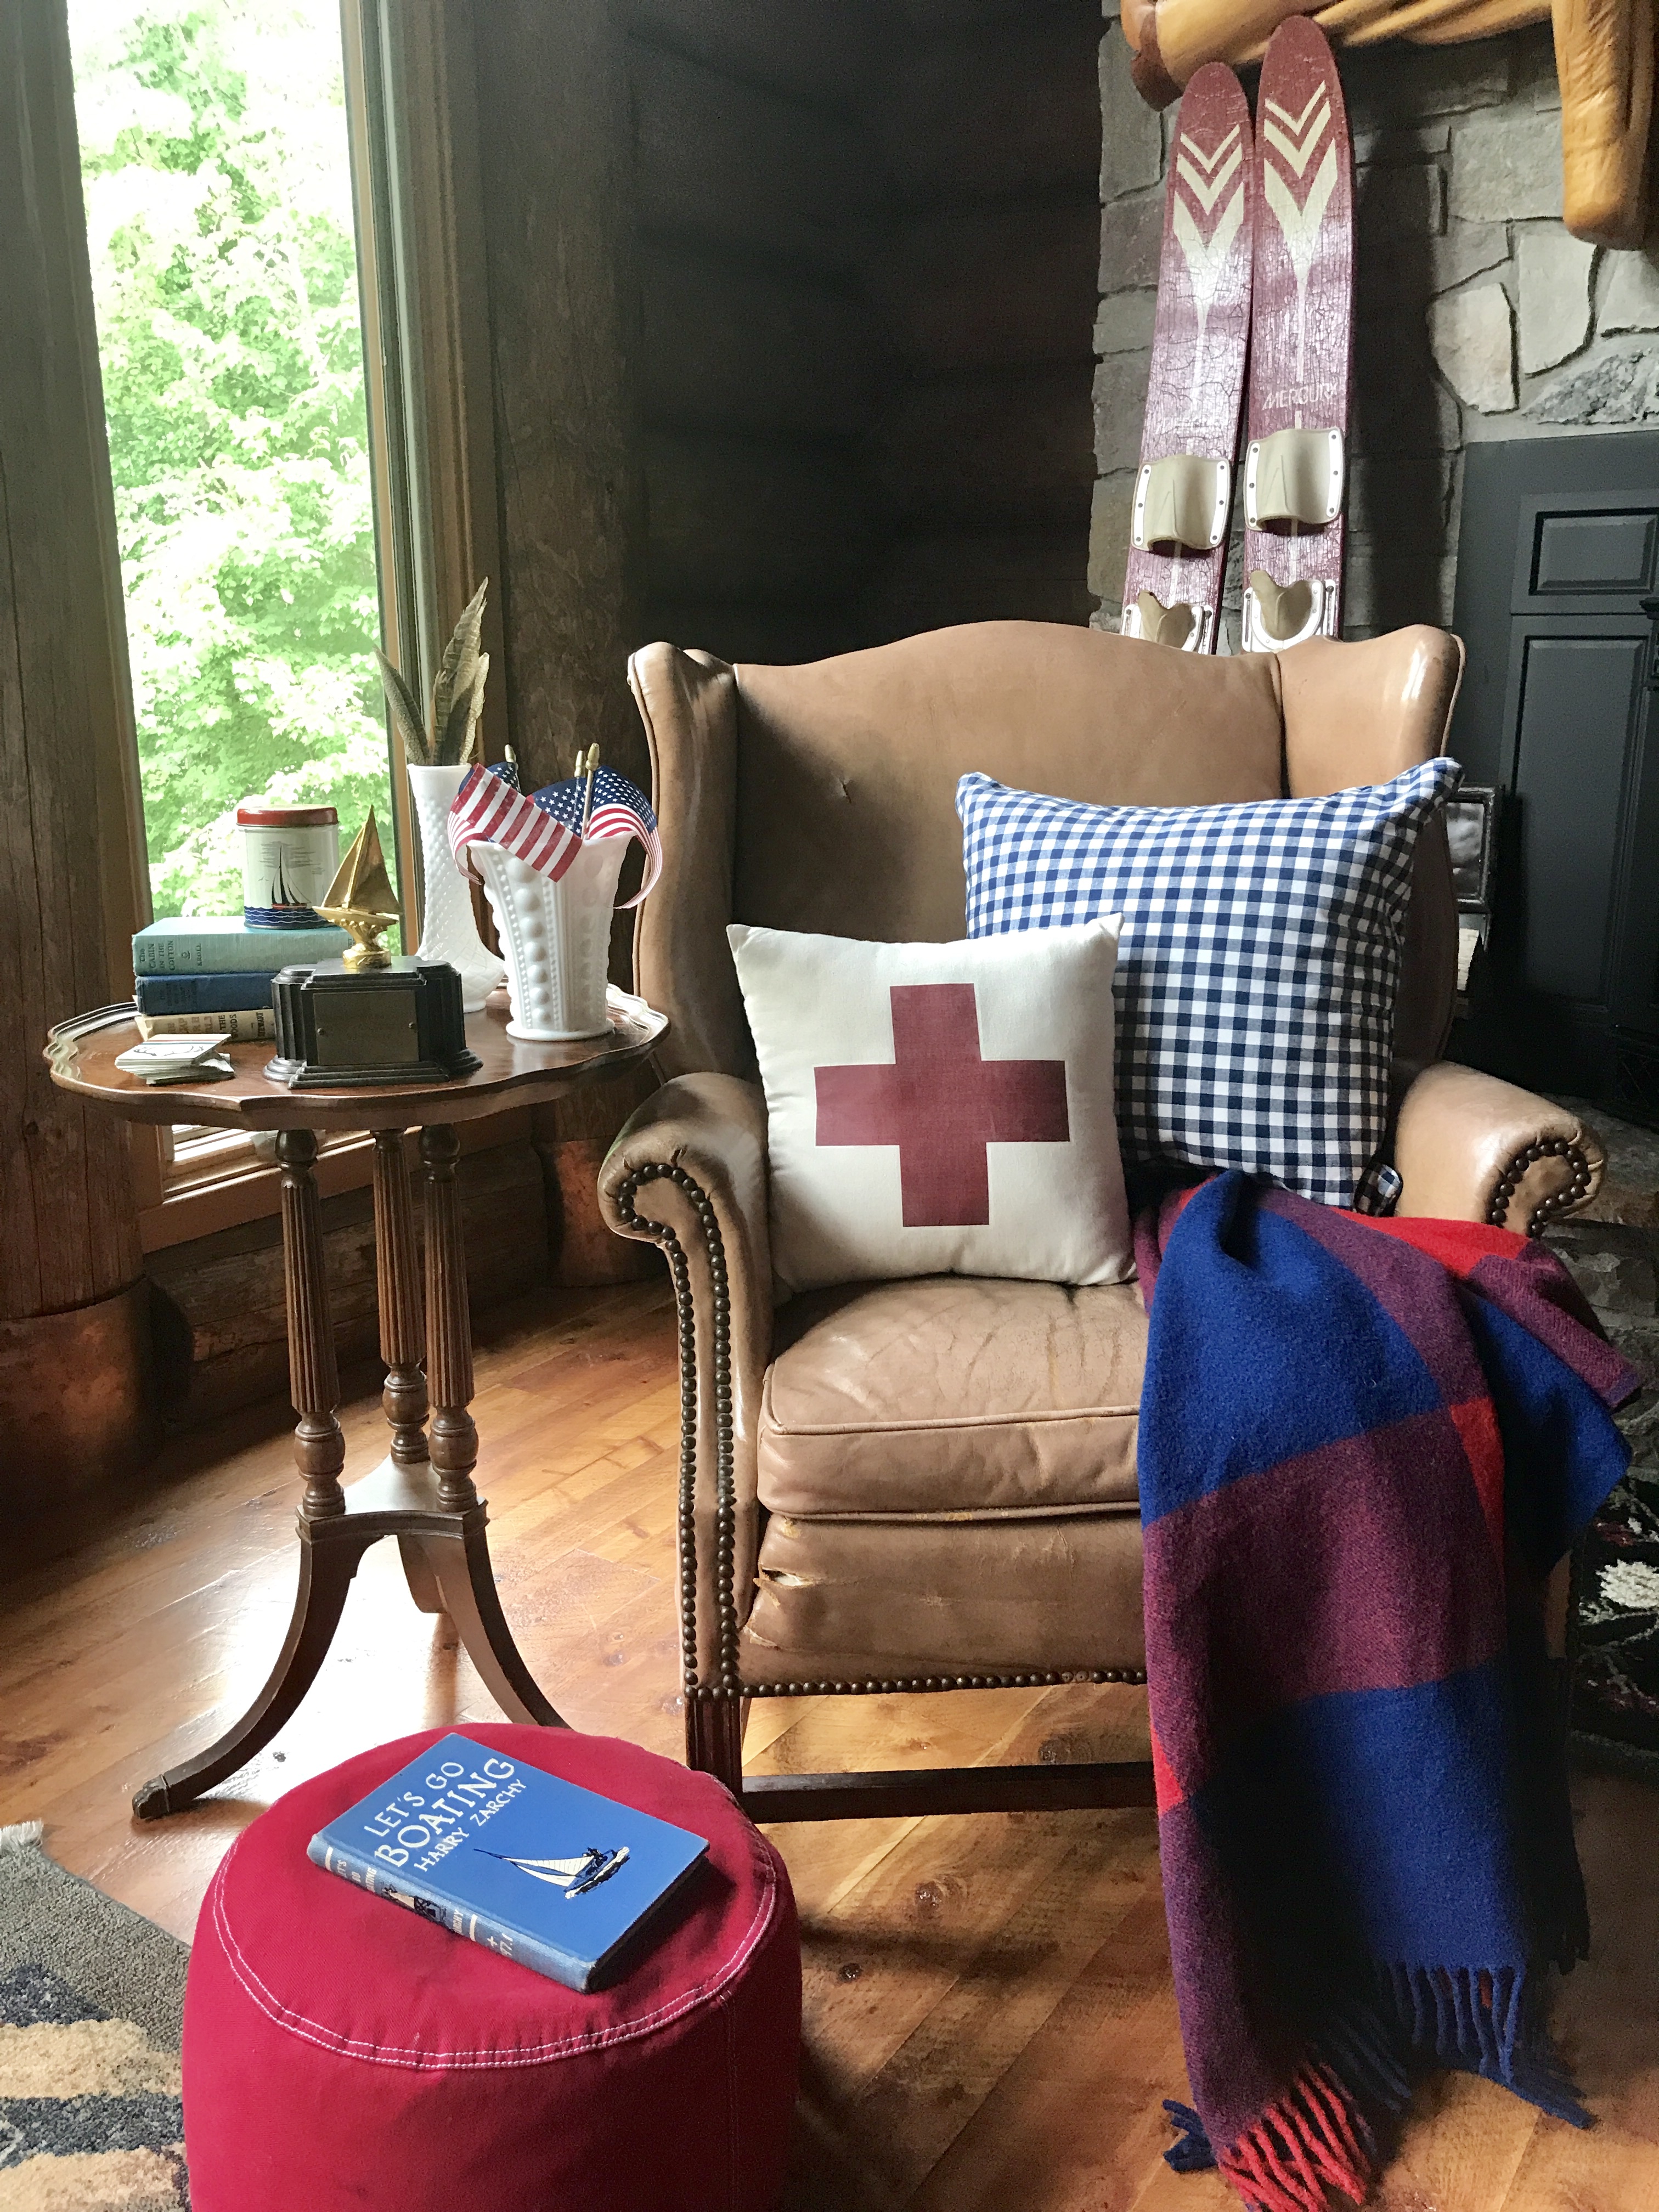 Summer Decor, Wingback, Throw Pillows, Red White and Blue Decor, House Tour, Cabin Decor, Lake House, Cottage Decor, Gingham